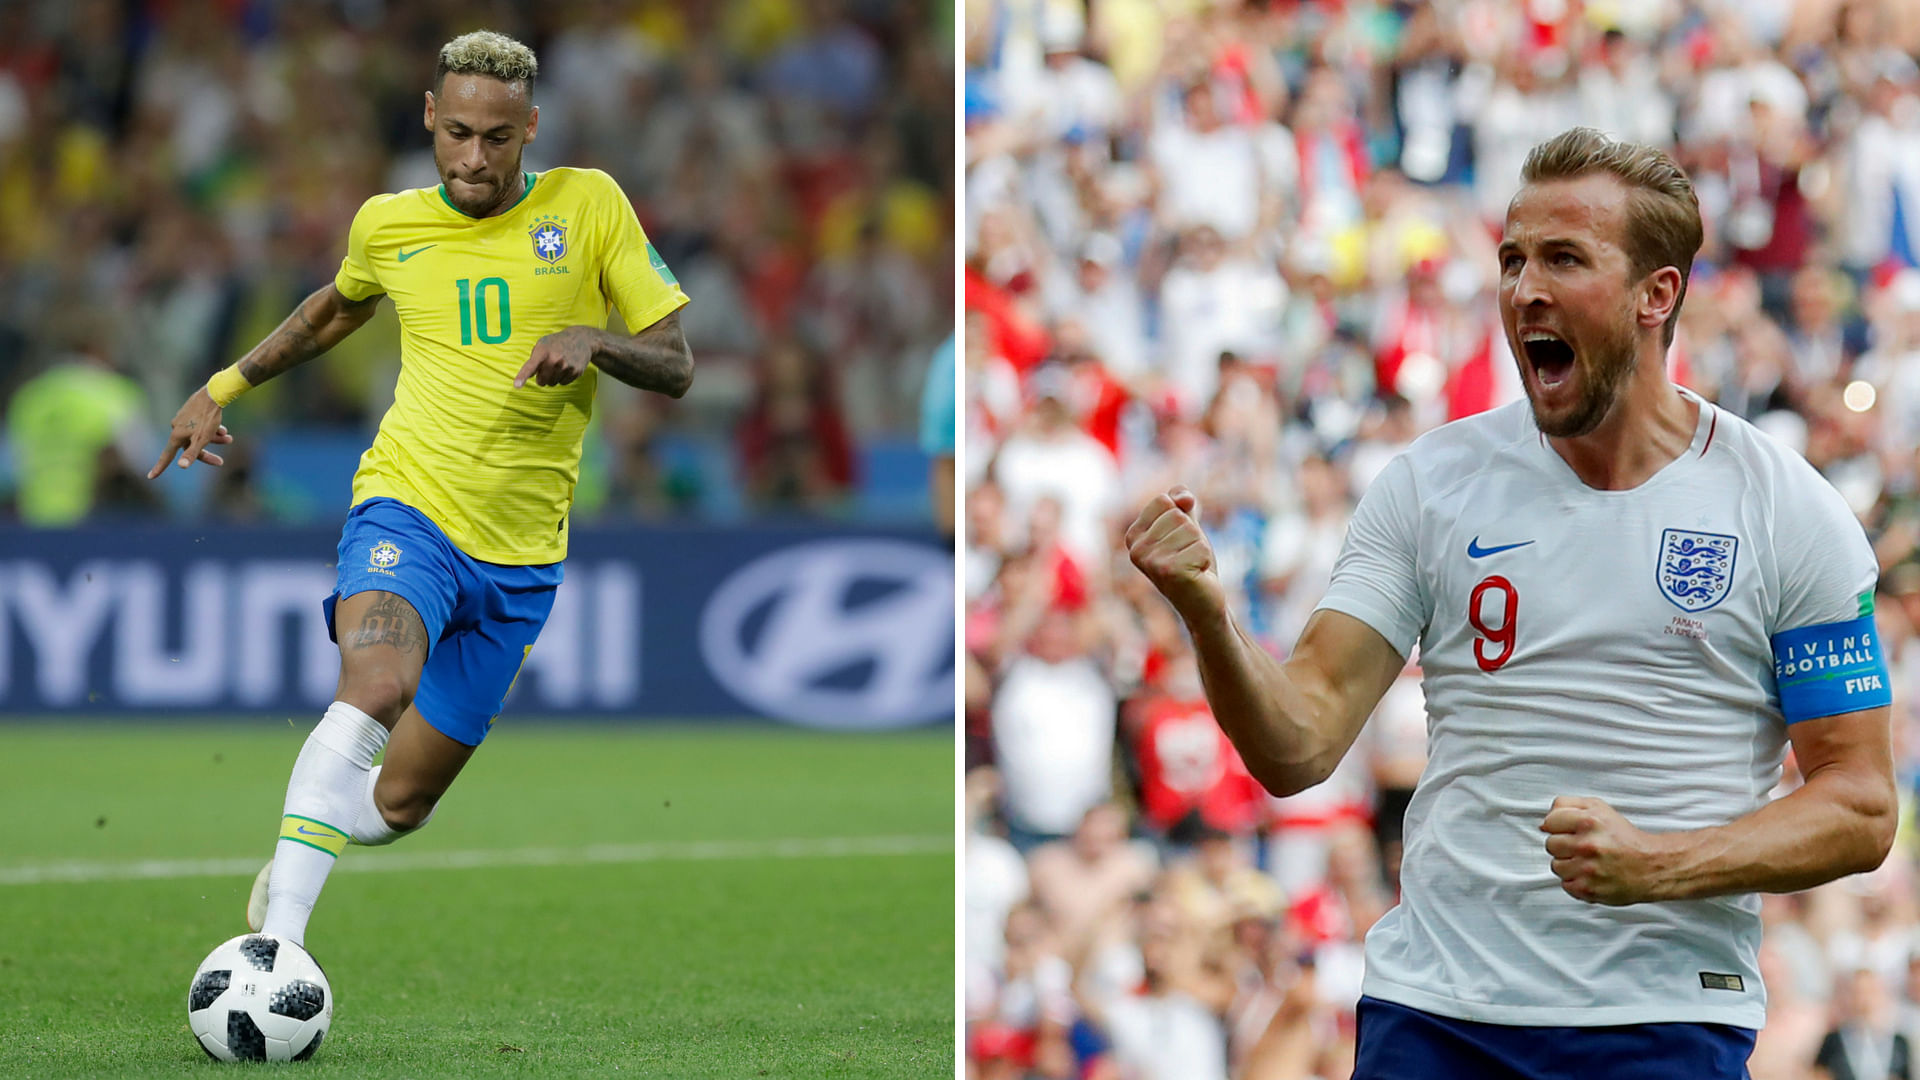 If they cross paths in the World Cup final, Neymar and Harry Kane will be looking to be decisive.